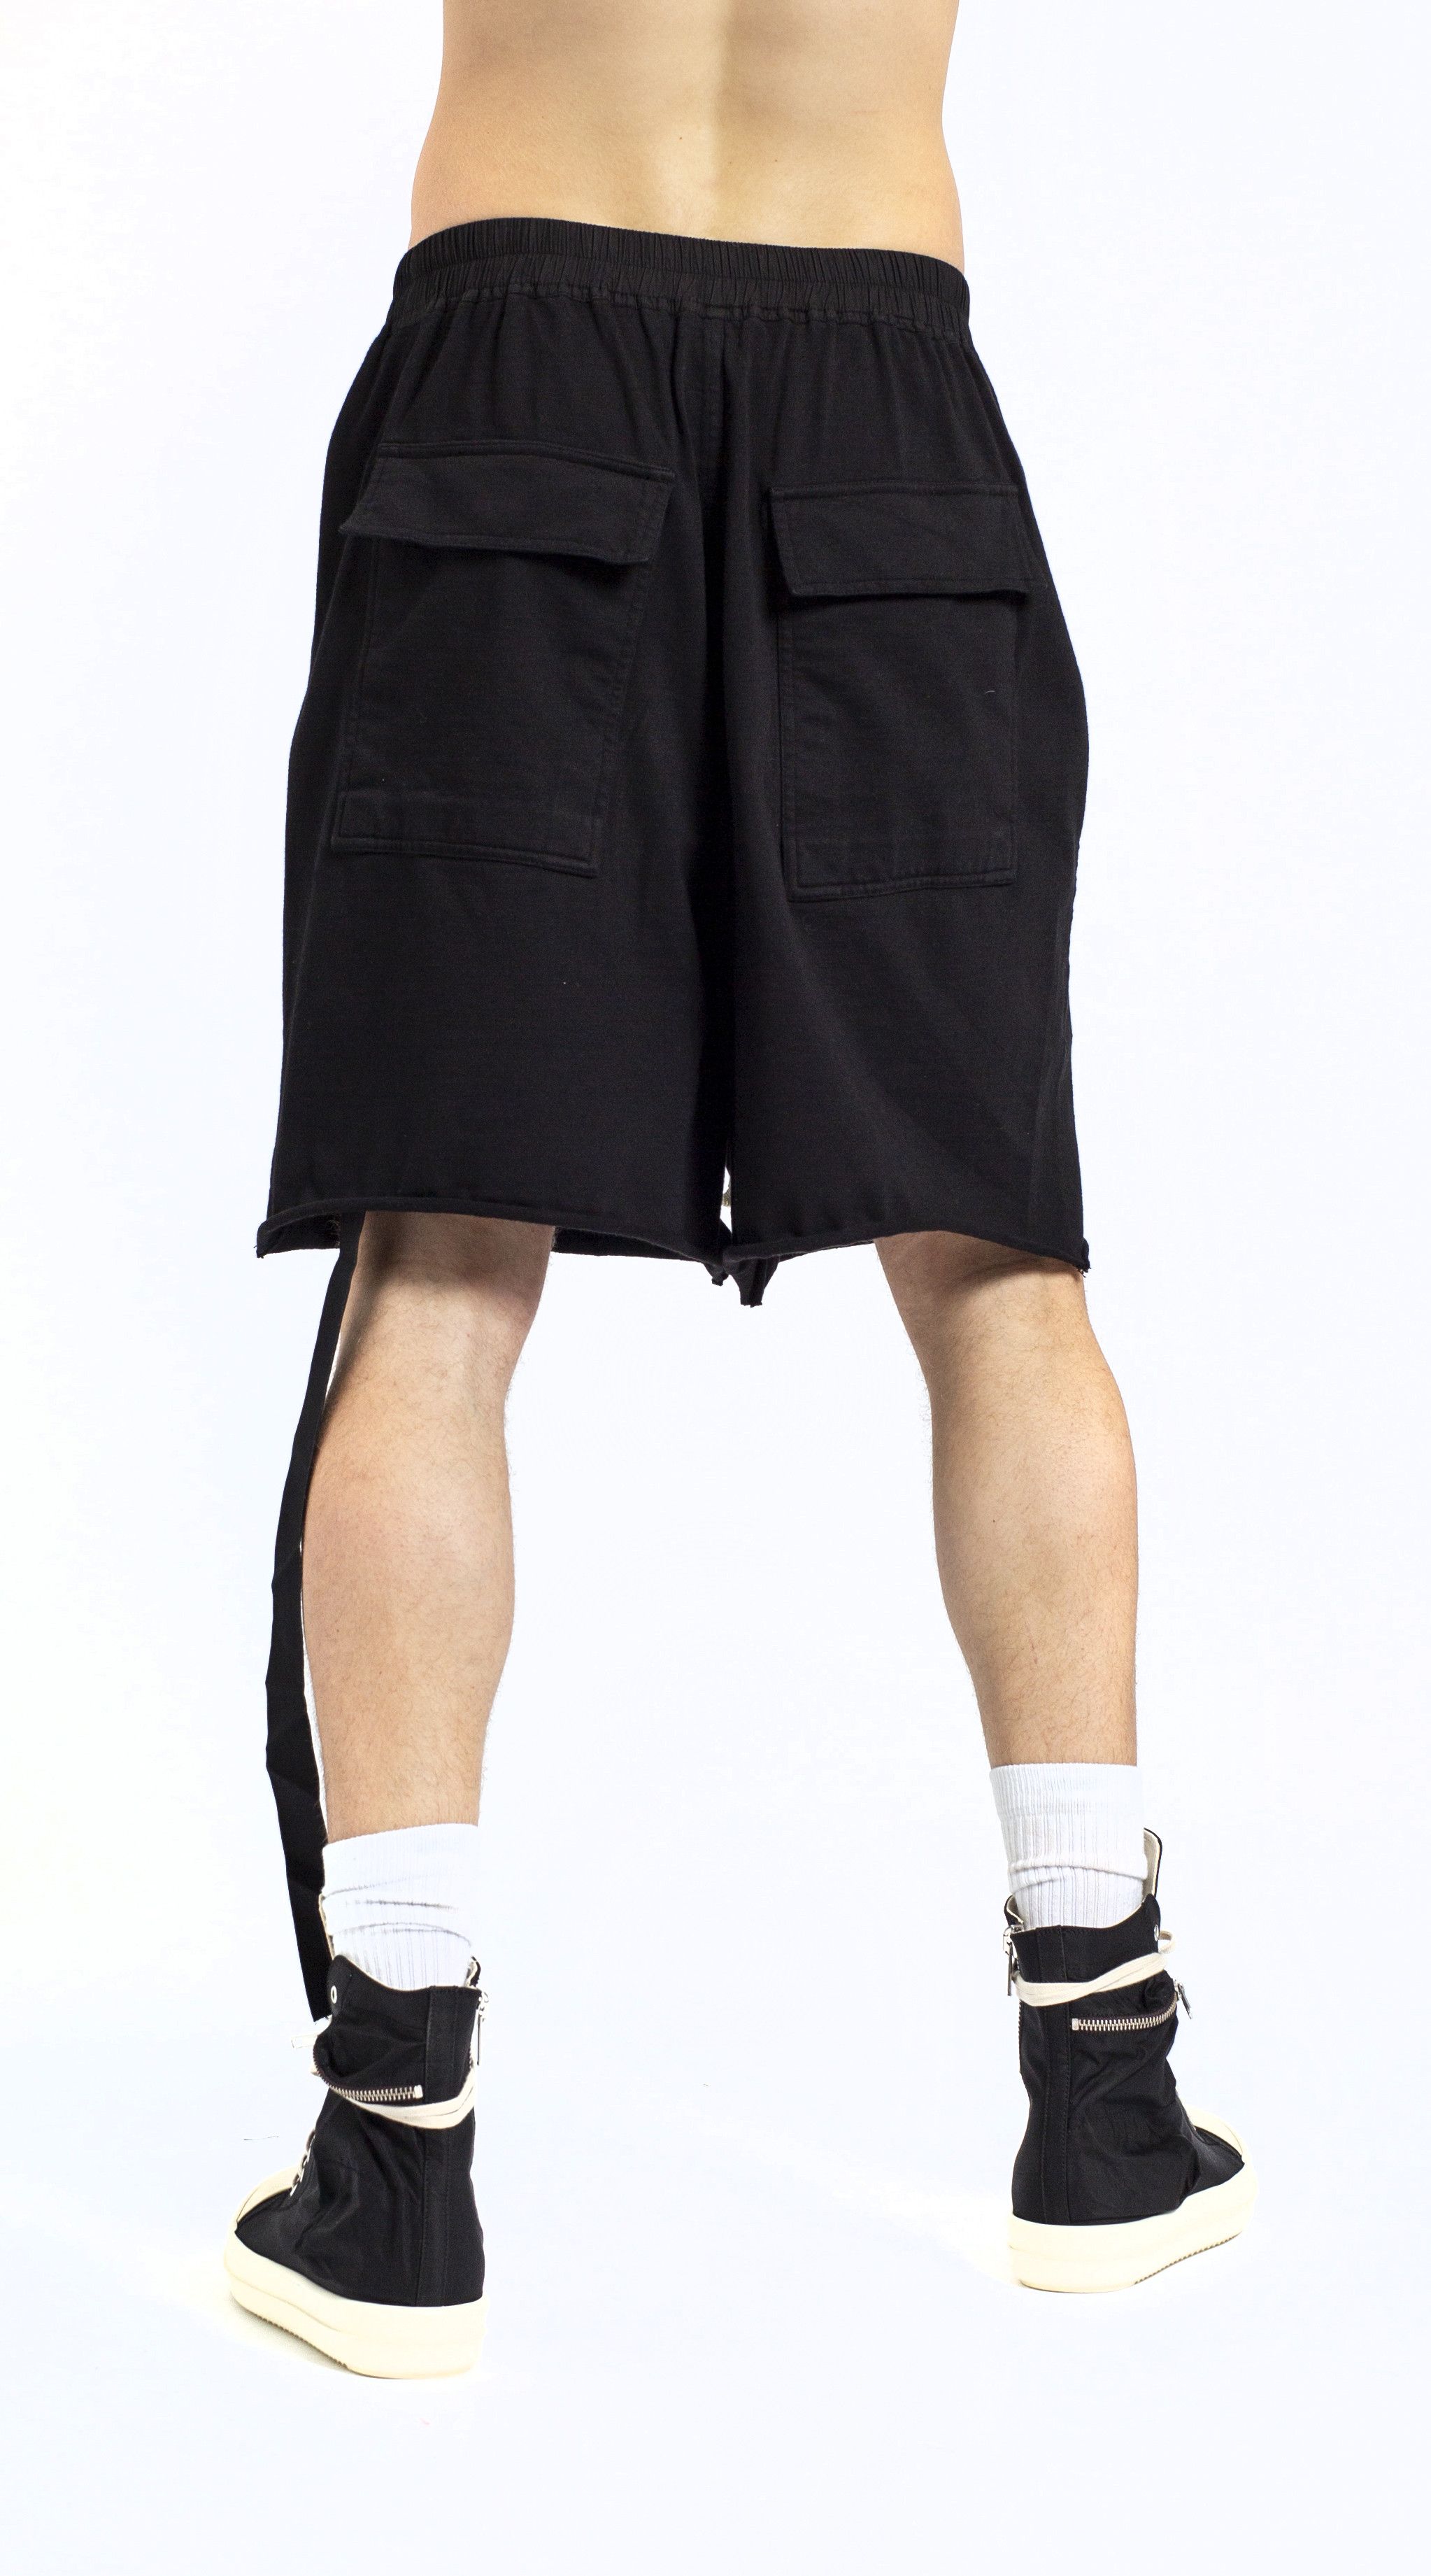 Rick Owens Drkshdw FAUN SHORTS IN BLACK *NEW + TAGS | Grailed